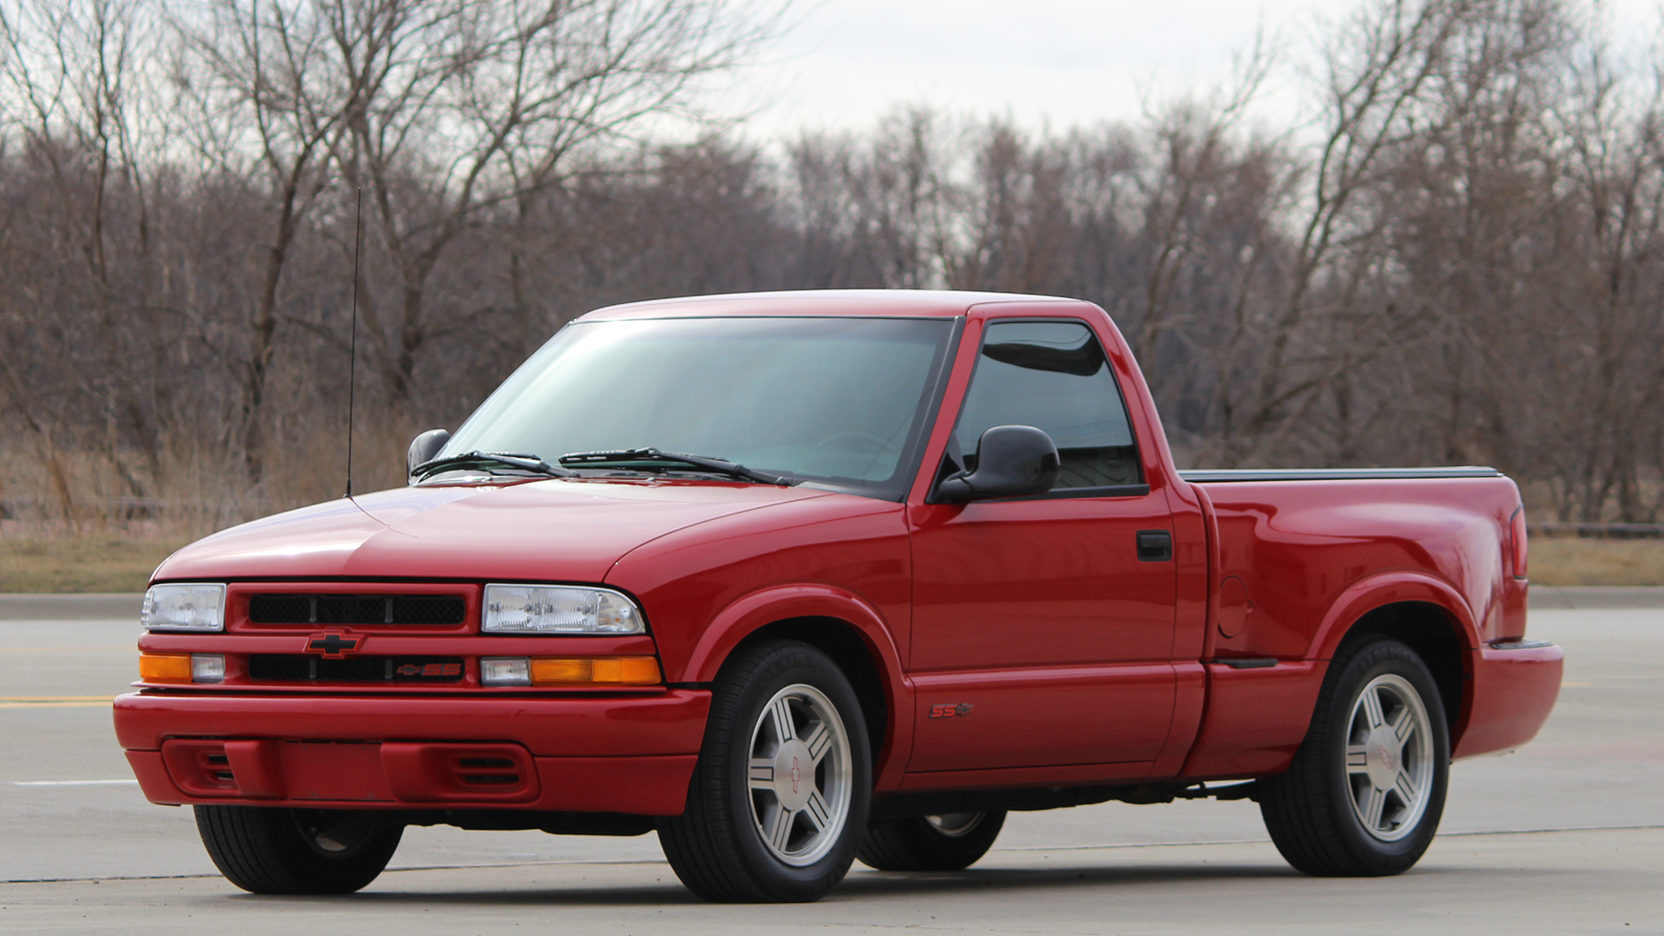 1998 chevy s10 owners manual download